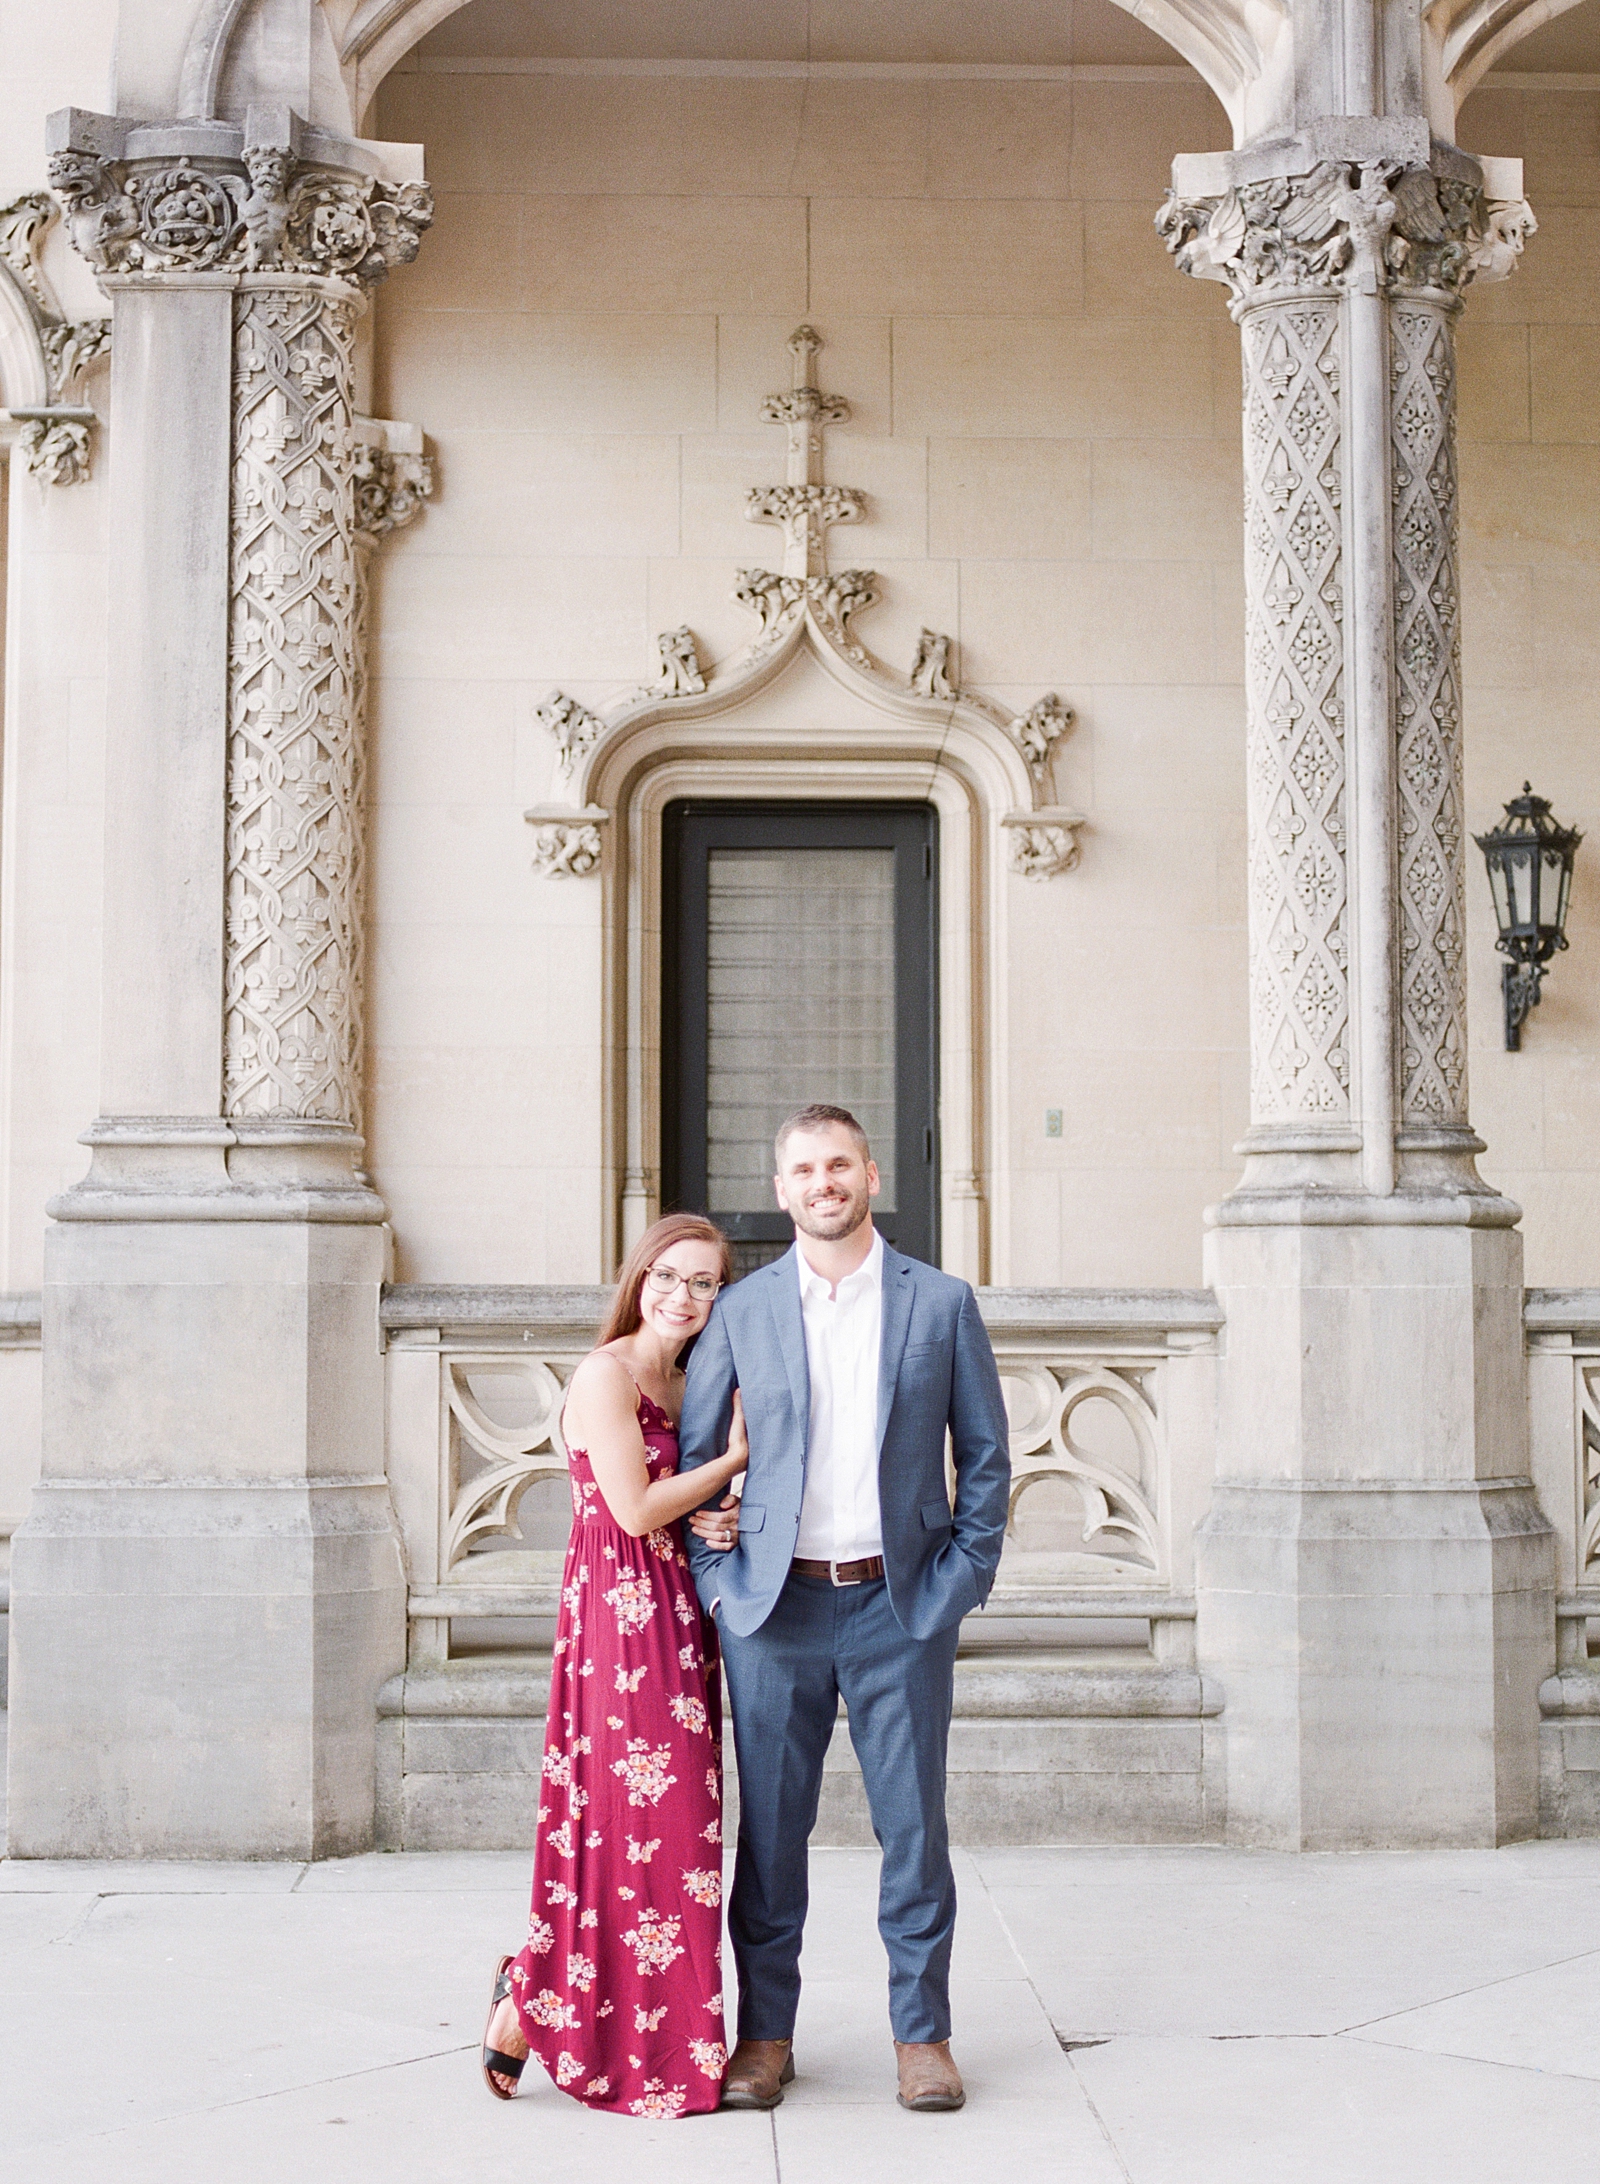 How To Have The Best Engagement Photos Couple Hugging At Biltmore Estate Photo